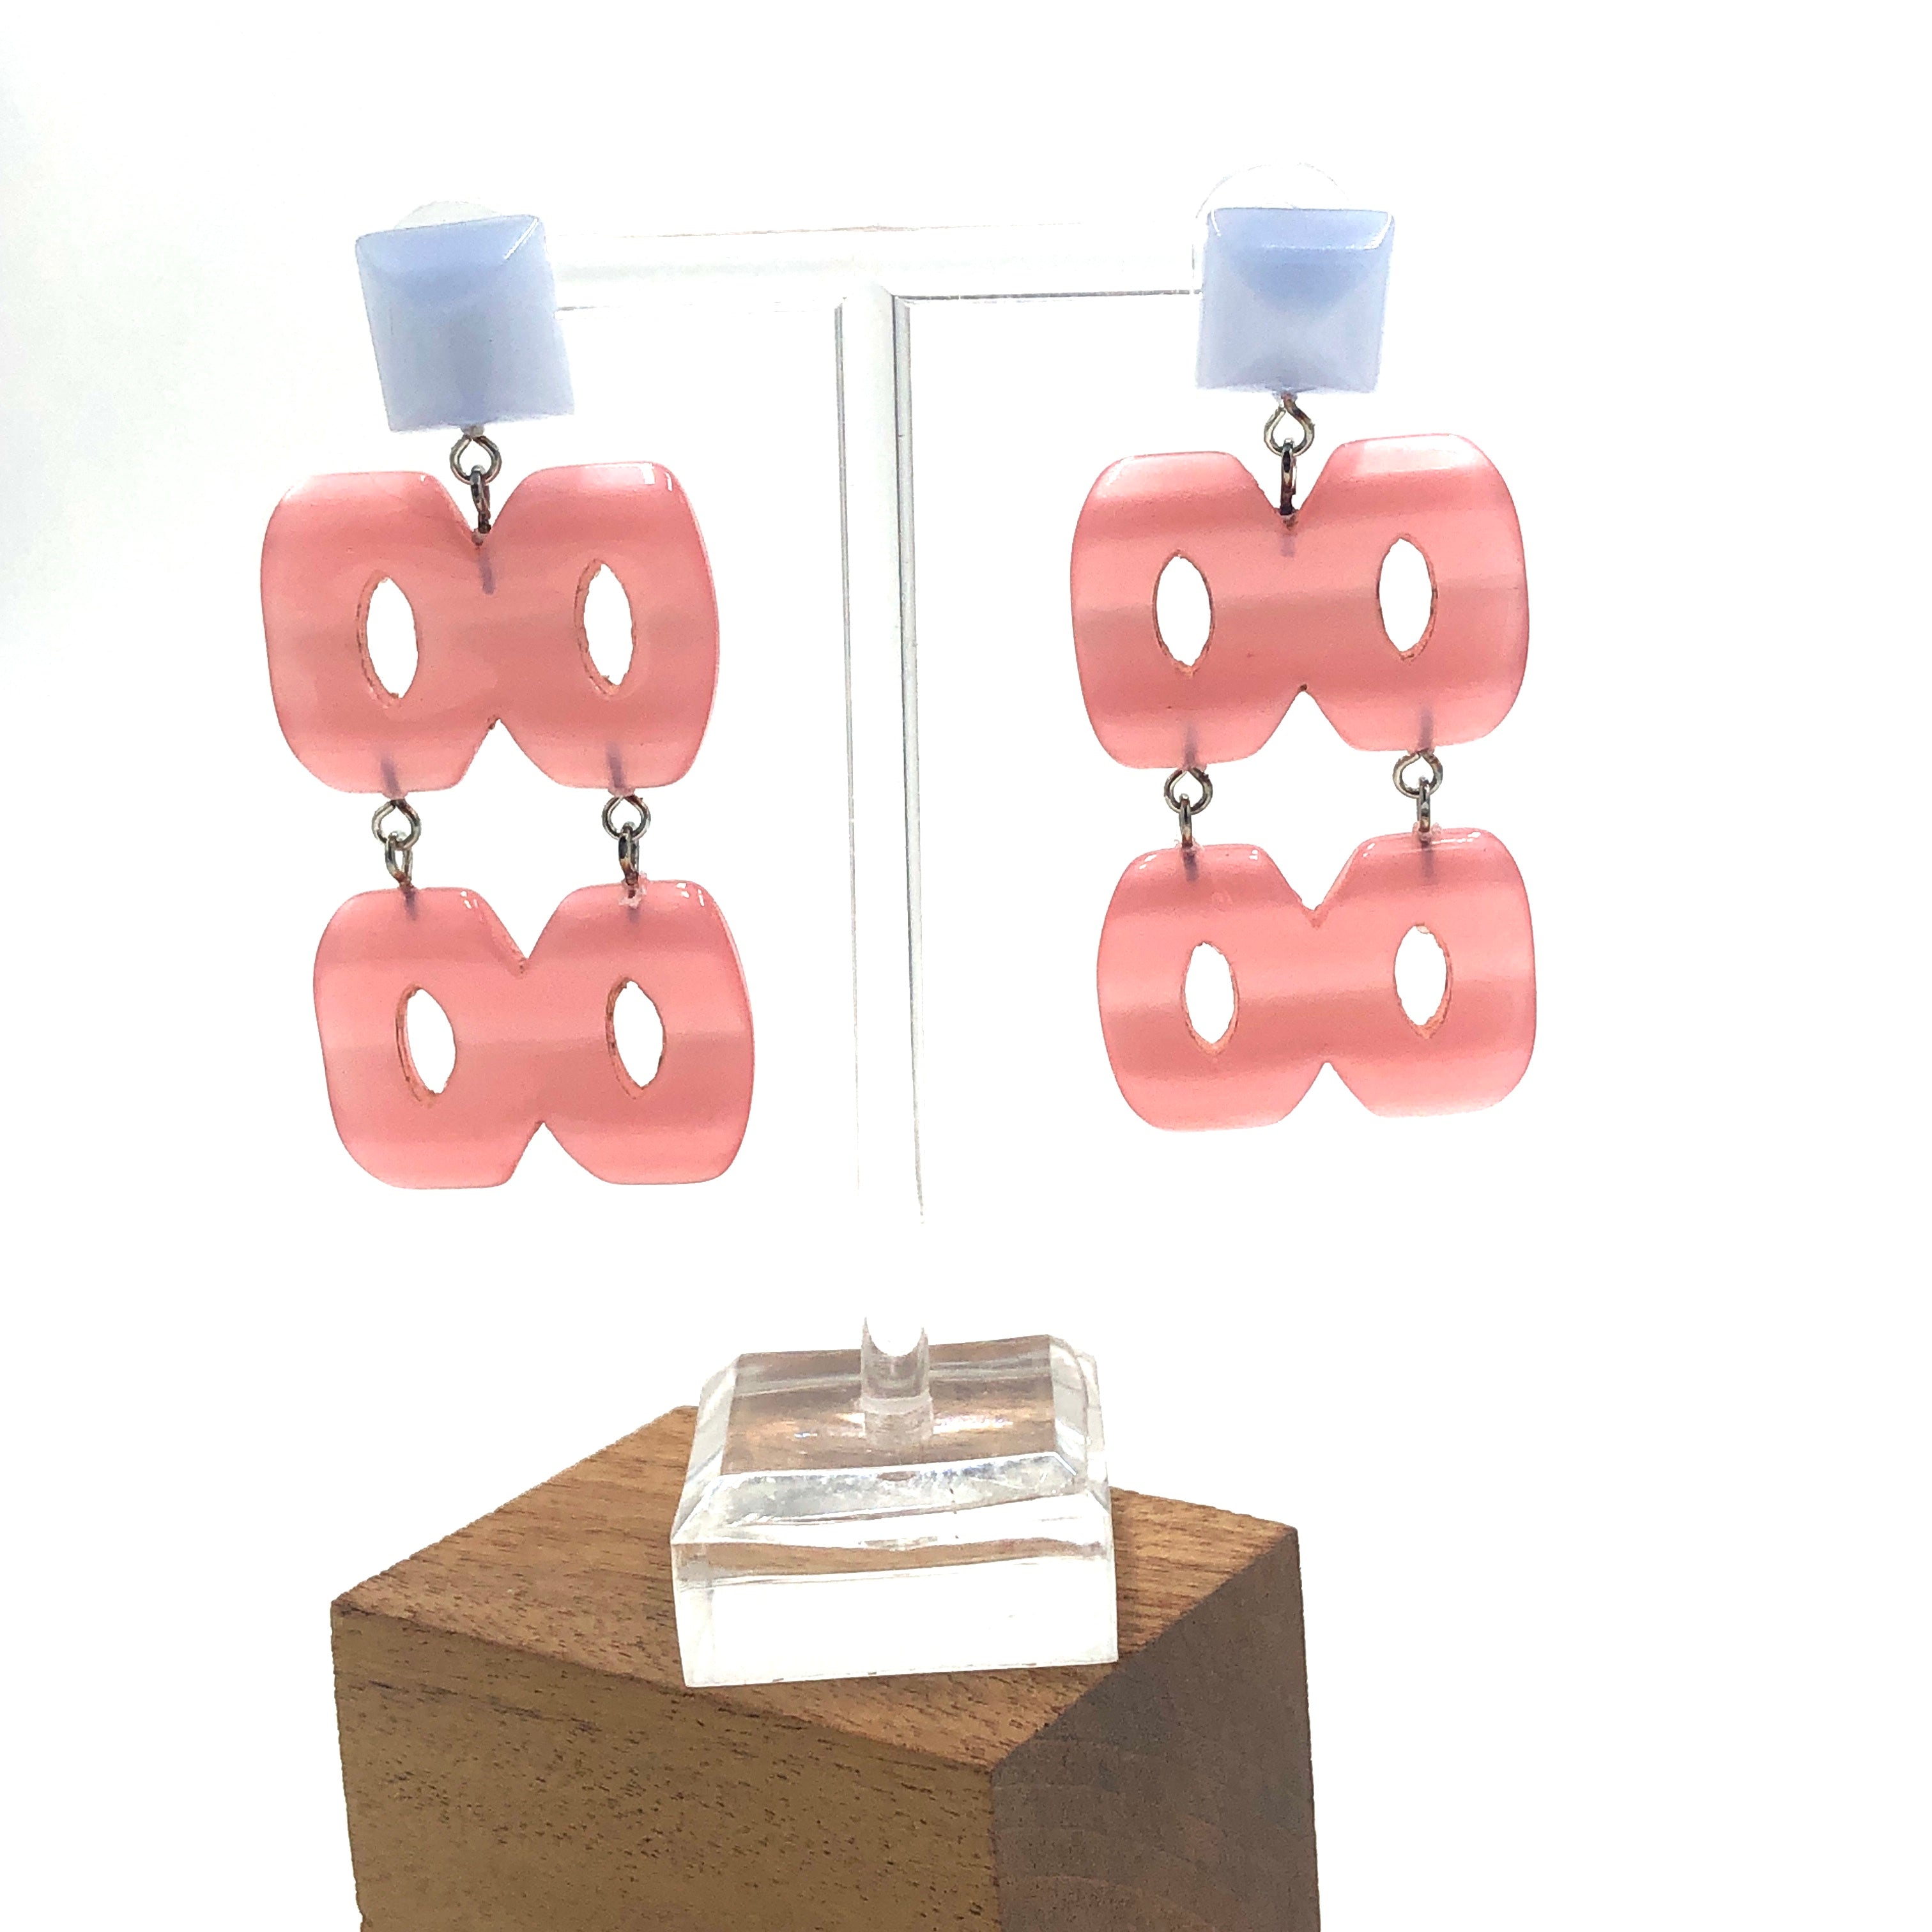 Blue &amp; Pink Hinged Moonglow Statement Earrings